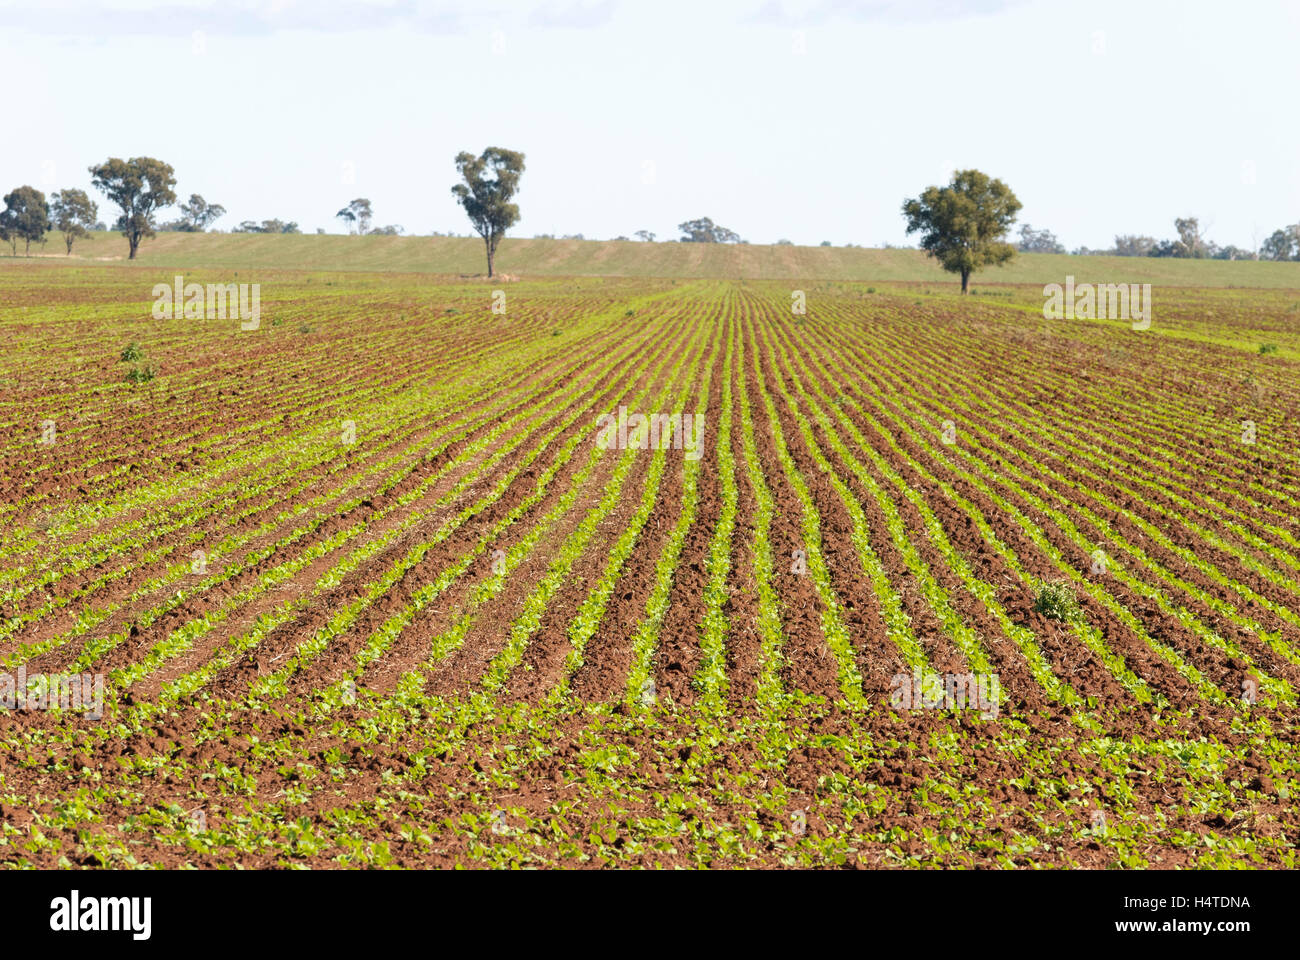 rows of young canola plant growing in rural paddock with trees and clouds in sky Stock Photo